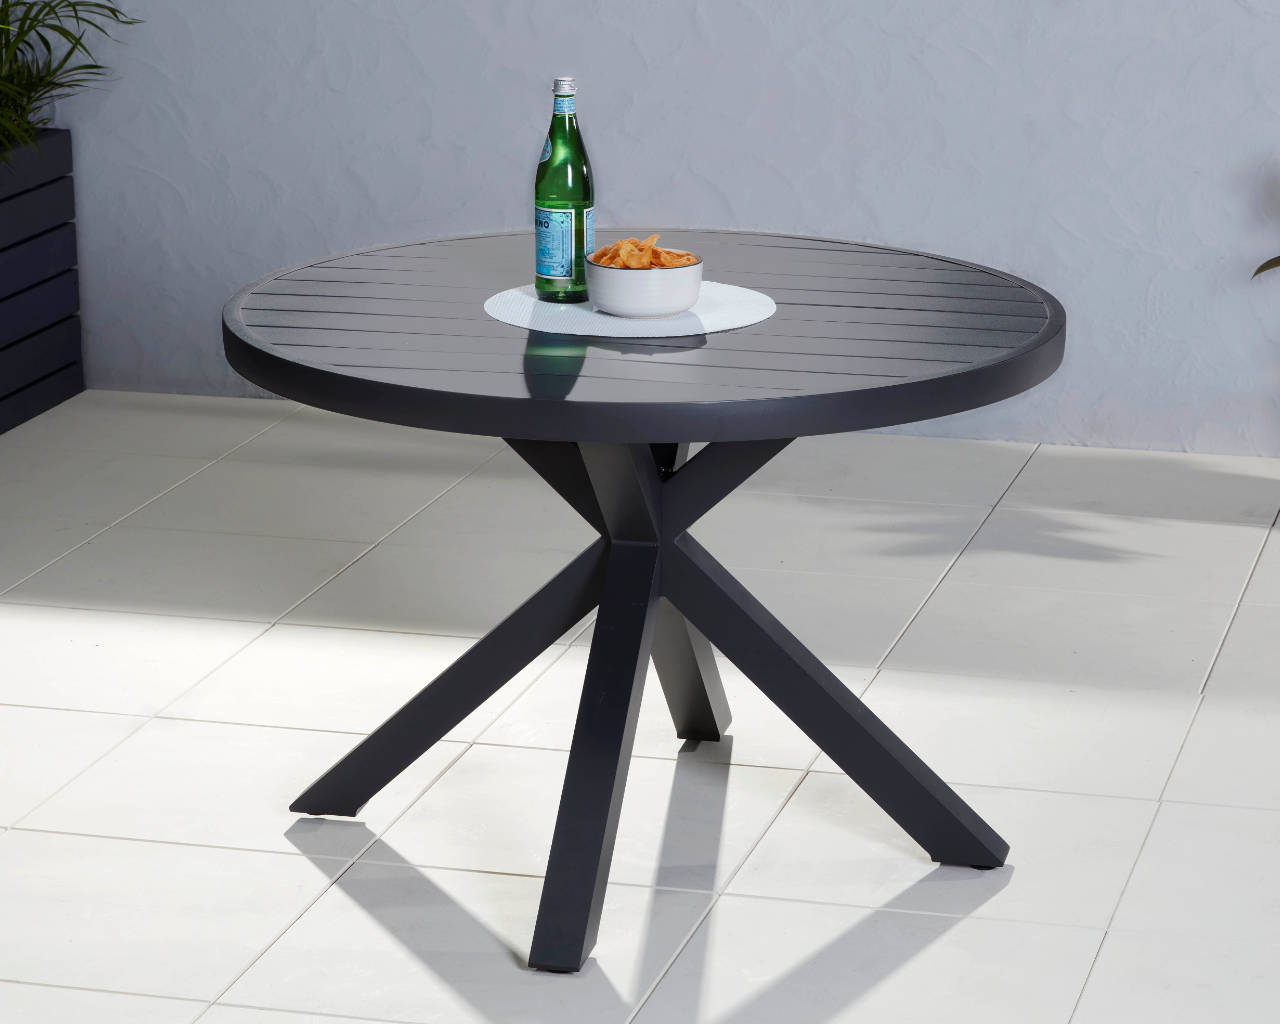 Jette Round Dining Table 107.5cm (Gunmetal Grey), , hi-res image number null